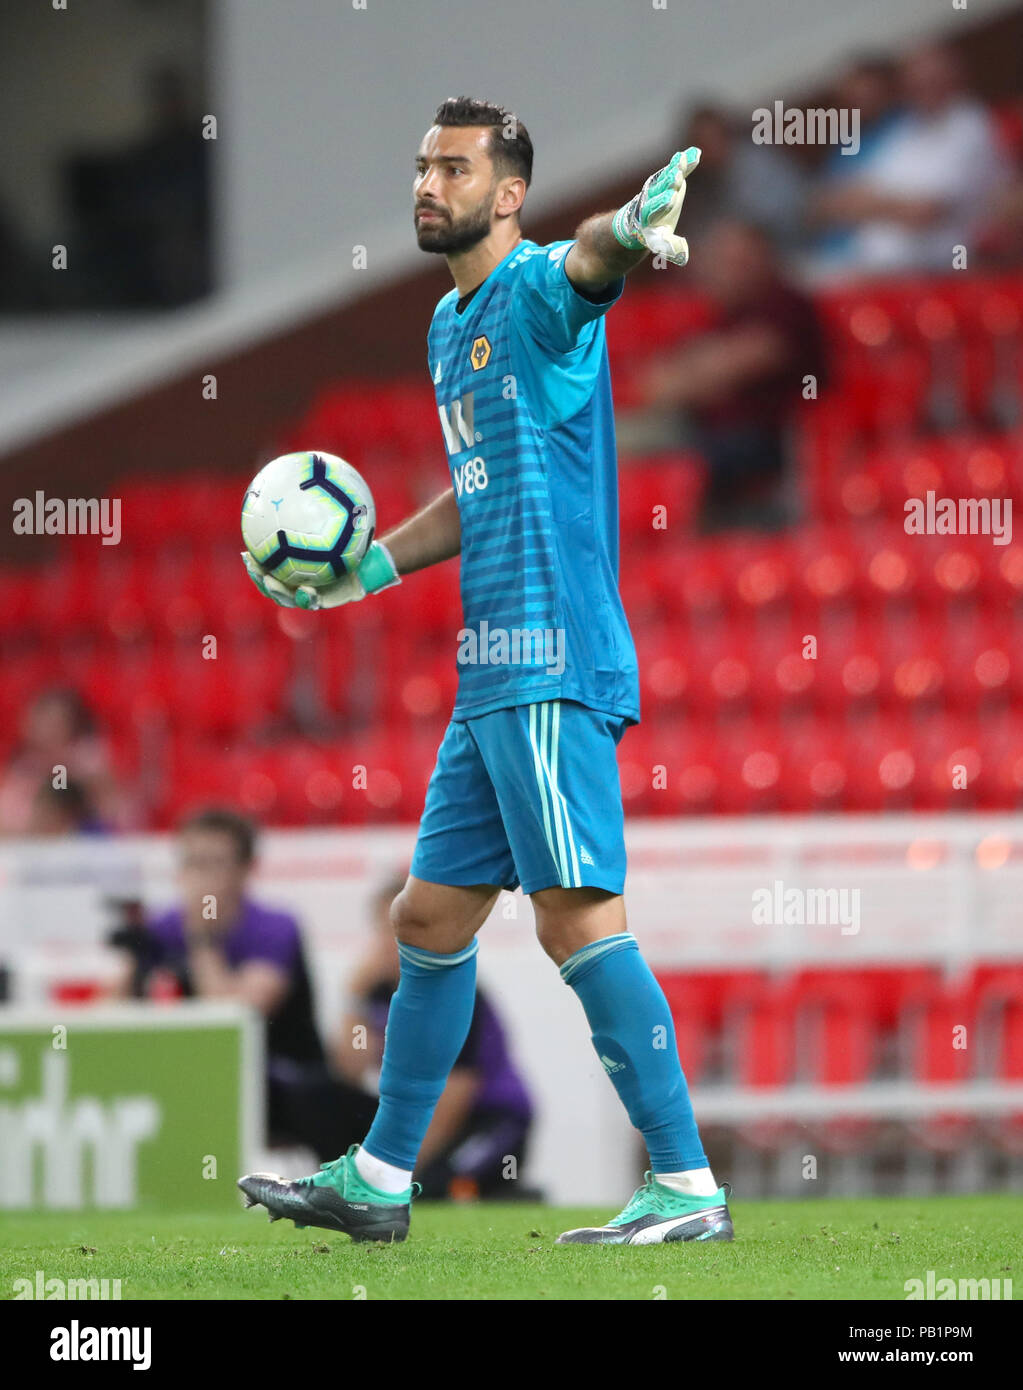 Wolverhampton Wanderers' goalkeeper Rui Patricio gestures during a pre season friendly match at The Bet365 Stadium, Stoke. PRESS ASSOCIATION Photo. Picture date: Wednesday July 25, 2018. Photo credit should read: Nick Potts/PA Wire. EDITORIAL USE ONLY No use with unauthorised audio, video, data, fixture lists, club/league logos or 'live' services. Online in-match use limited to 75 images, no video emulation. No use in betting, games or single club/league/player publications. Stock Photo